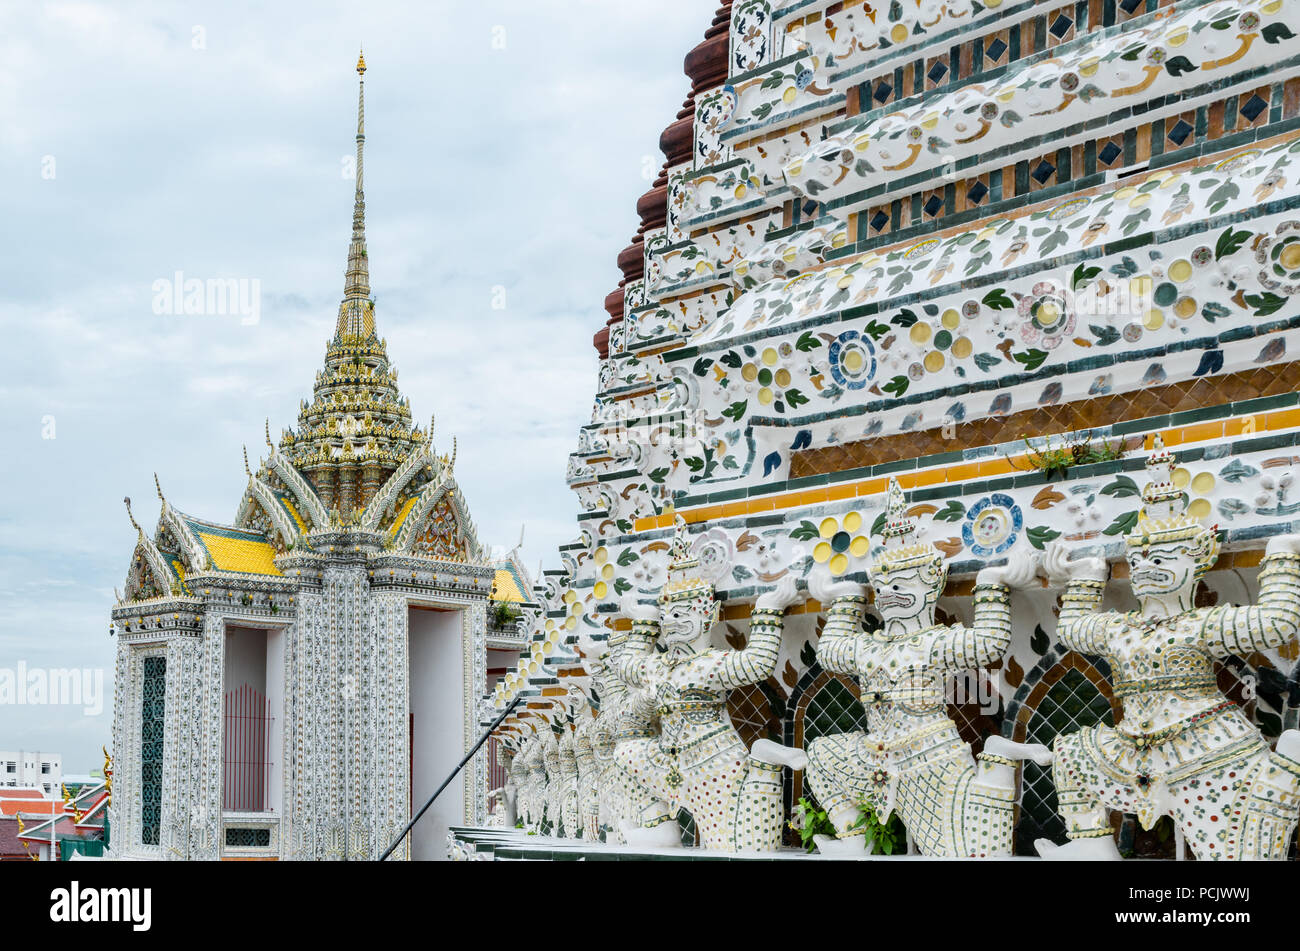 Wat Arun is  the most famous and photographed temple in Bangkok, which features a soaring 70m high spire decorated with colored glass and porcelain. Stock Photo